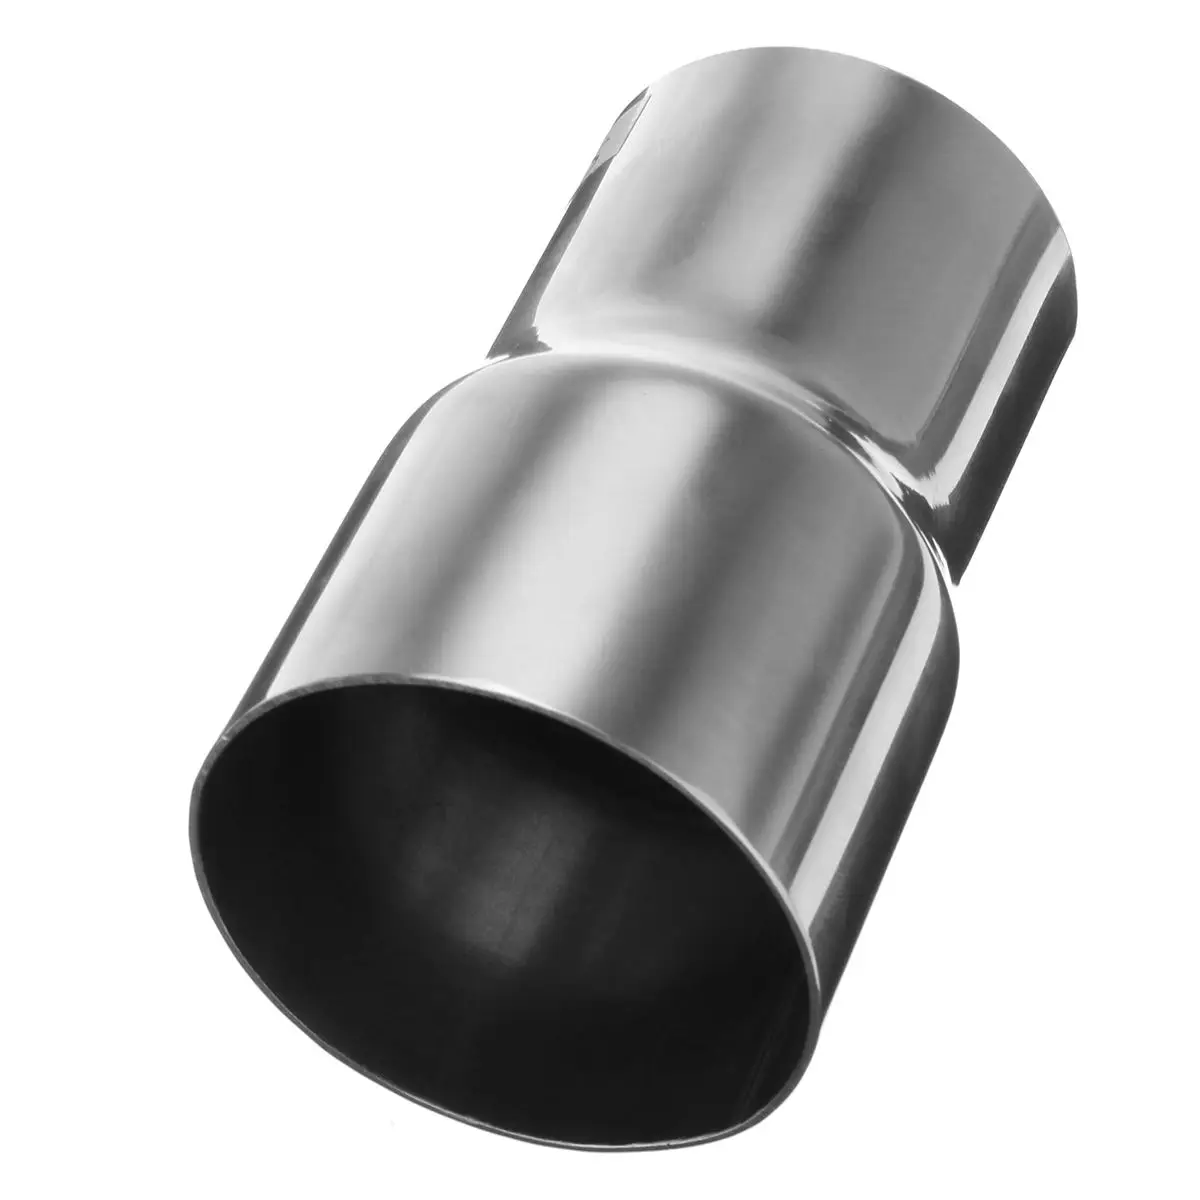 51-63MM Exhaust Pipe Adapter,Universal Stainless Steel Exhaust Pipe Connector Tube Adapter Reducer Modified Part